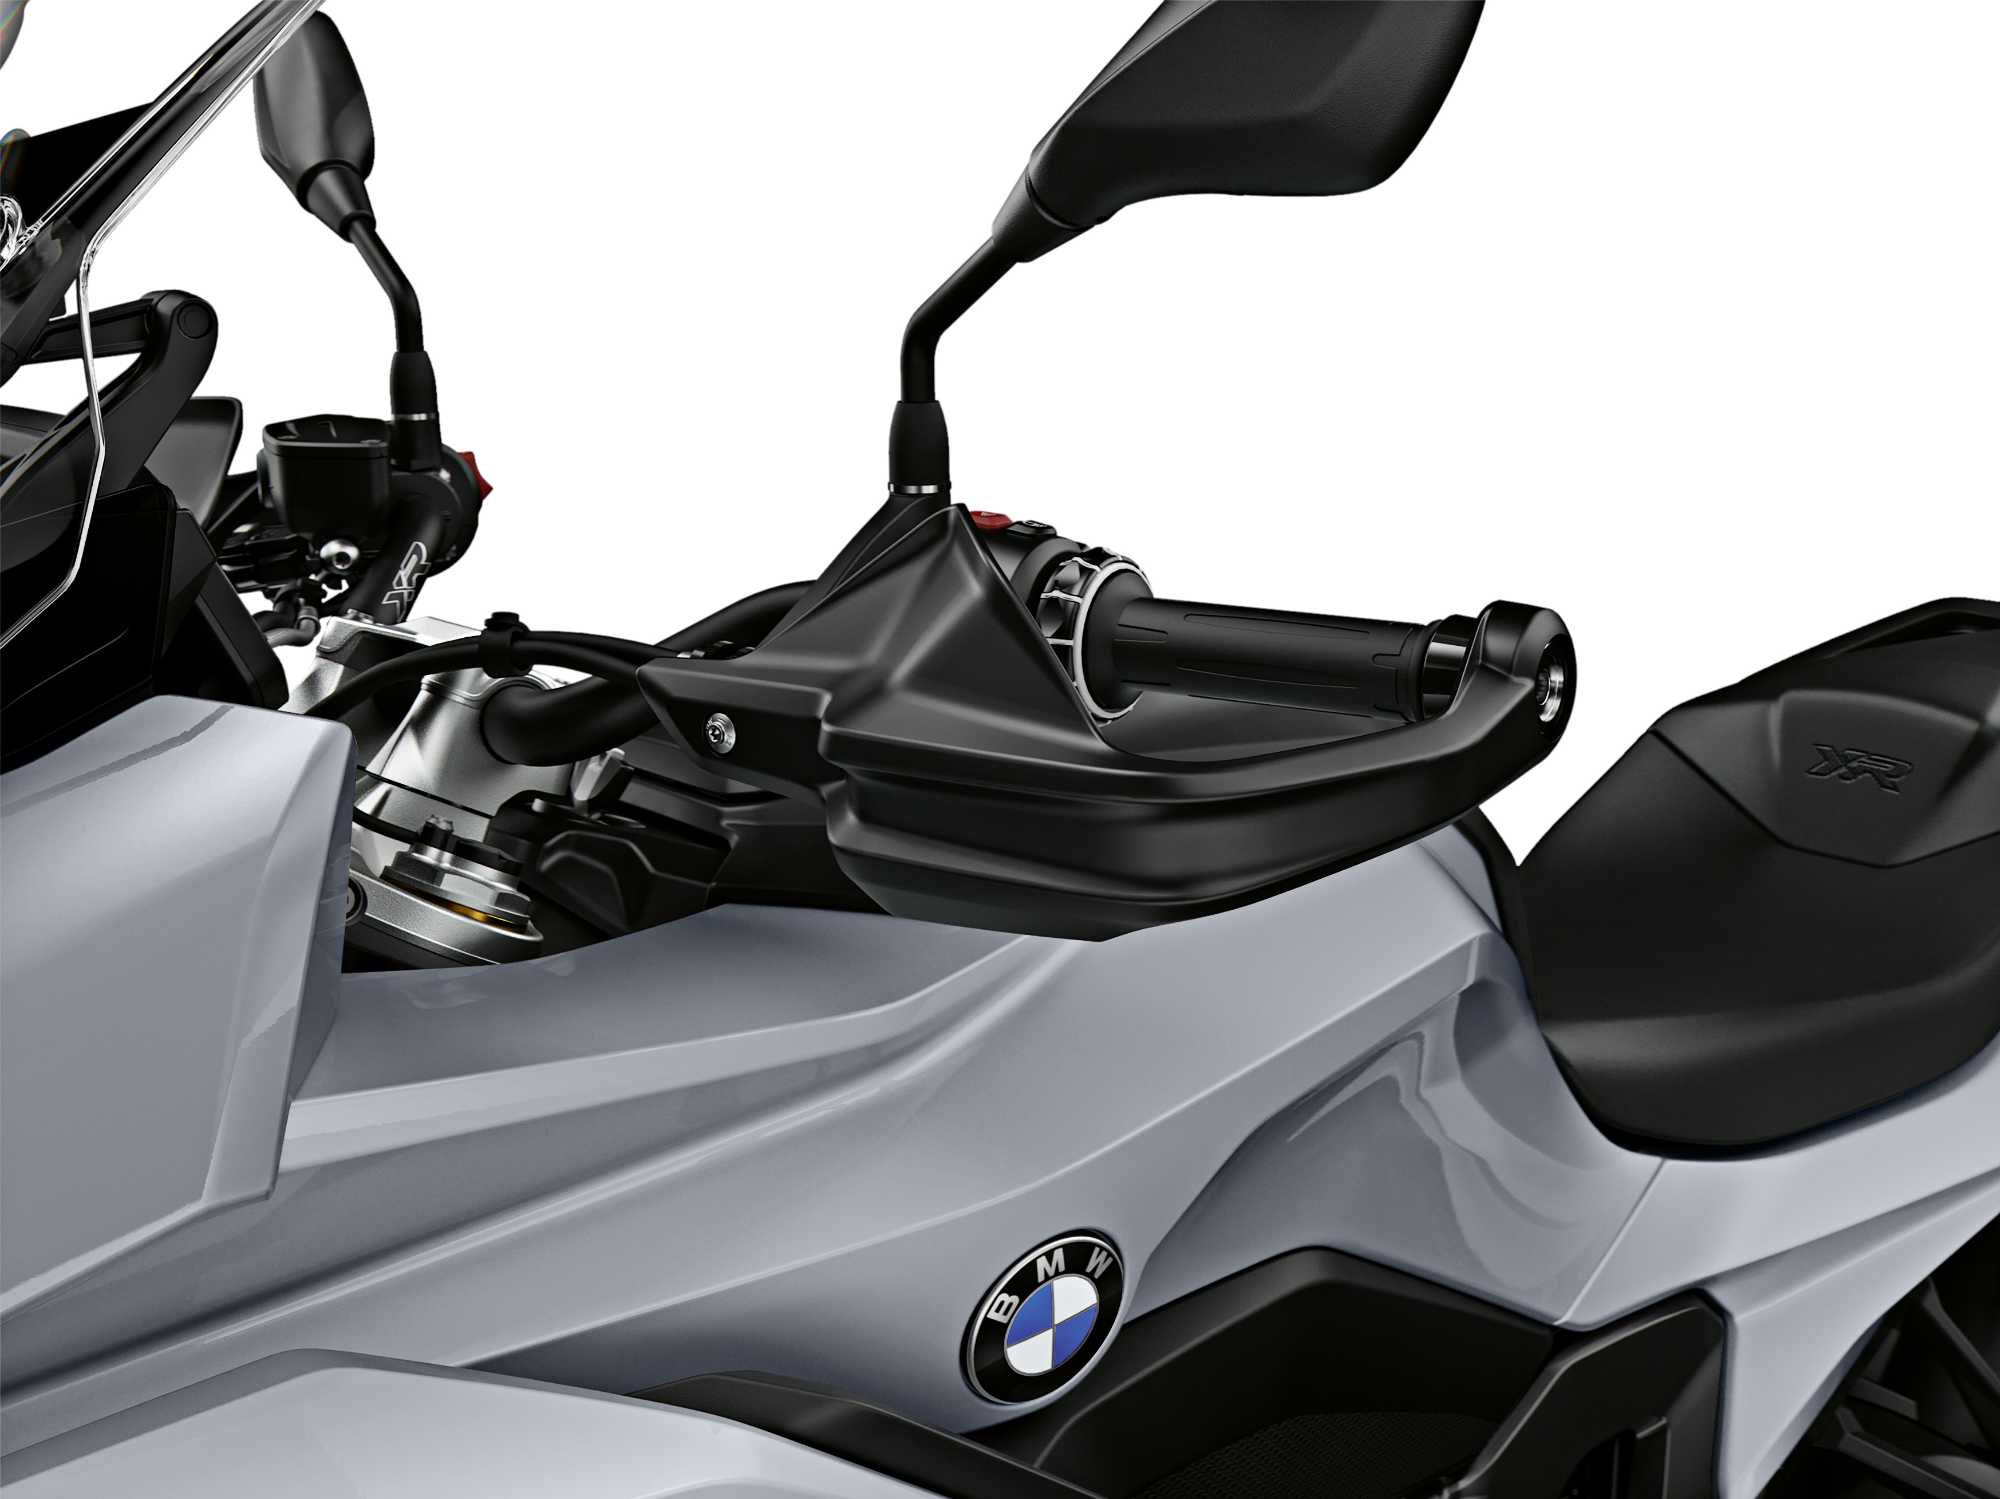 BMW S 1000 XR. Option Hand Protector. (11/2019)